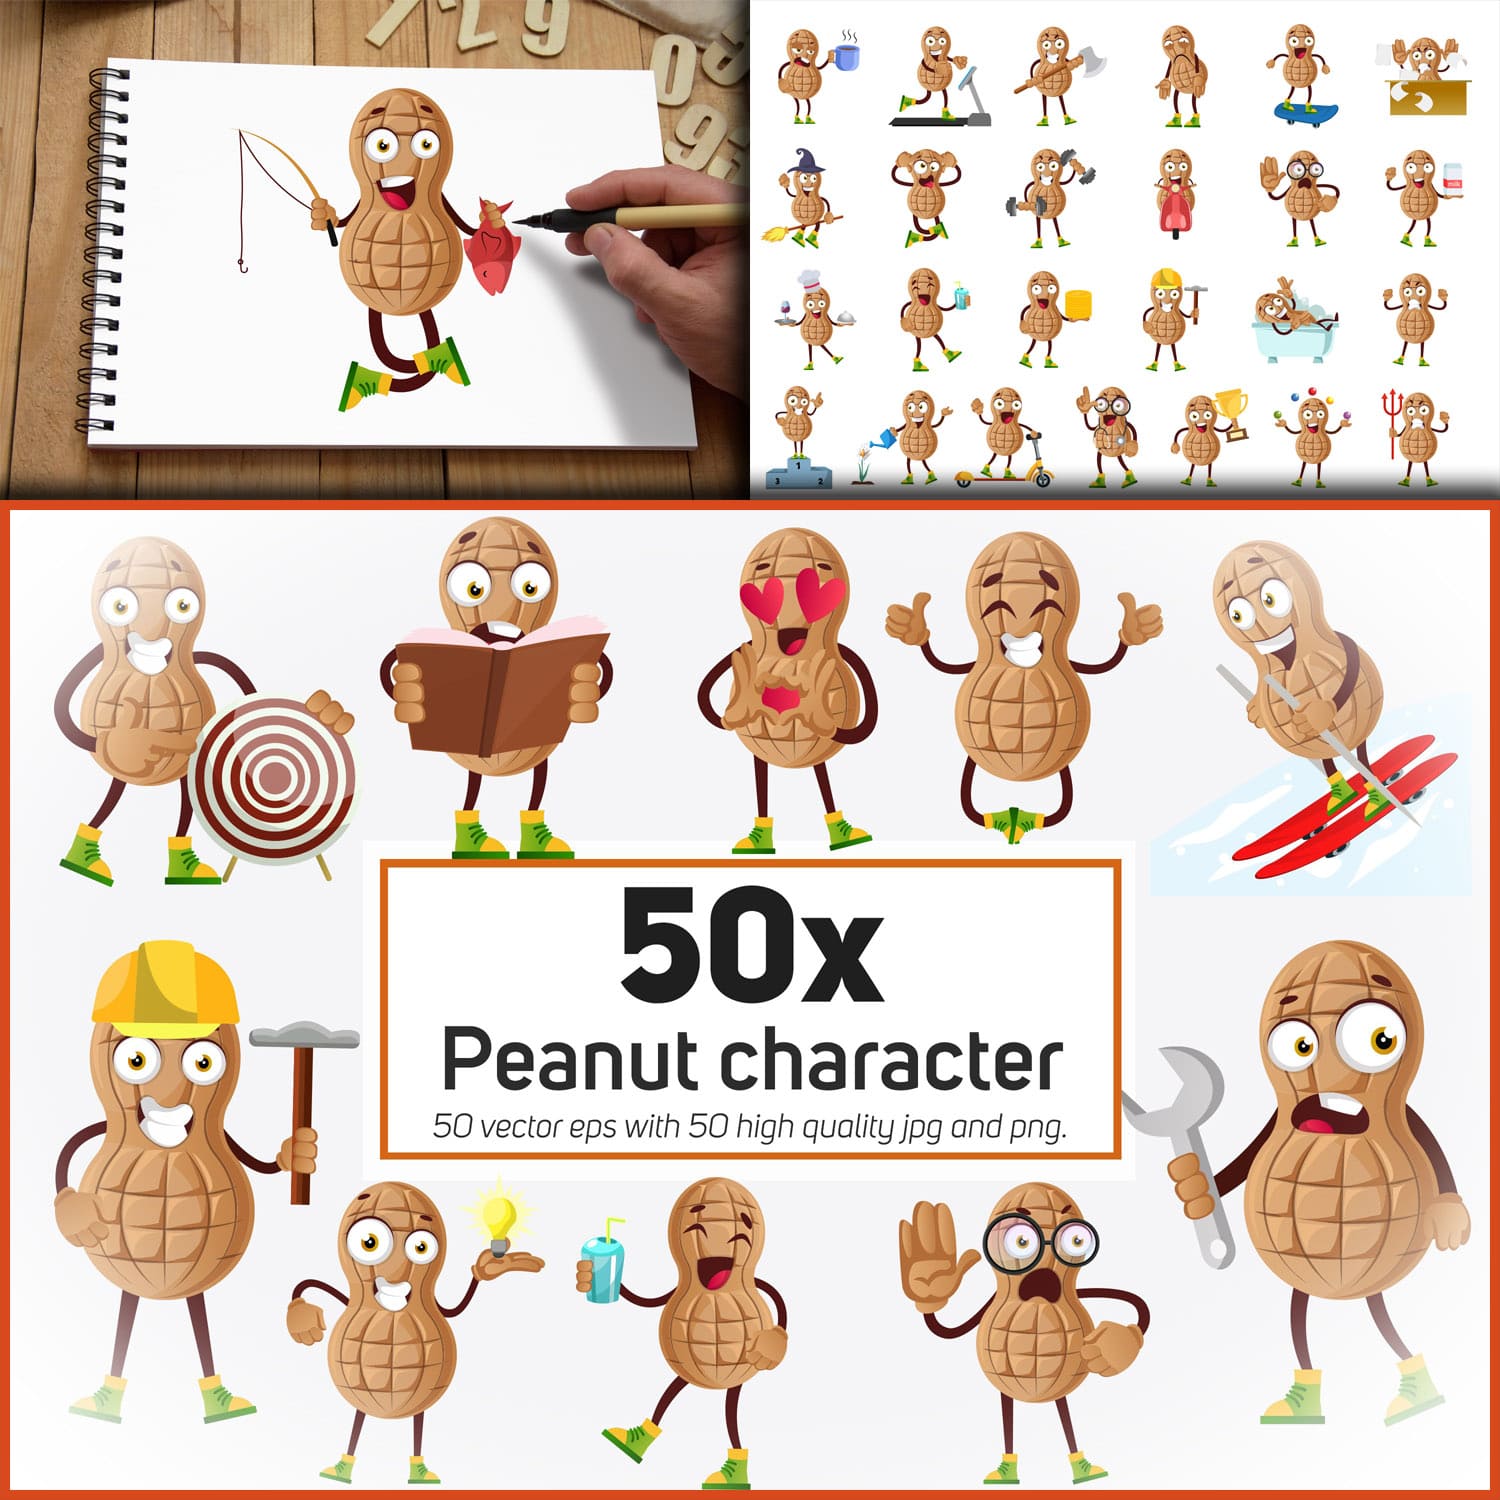 Preview peanut character or mascot in different situation.